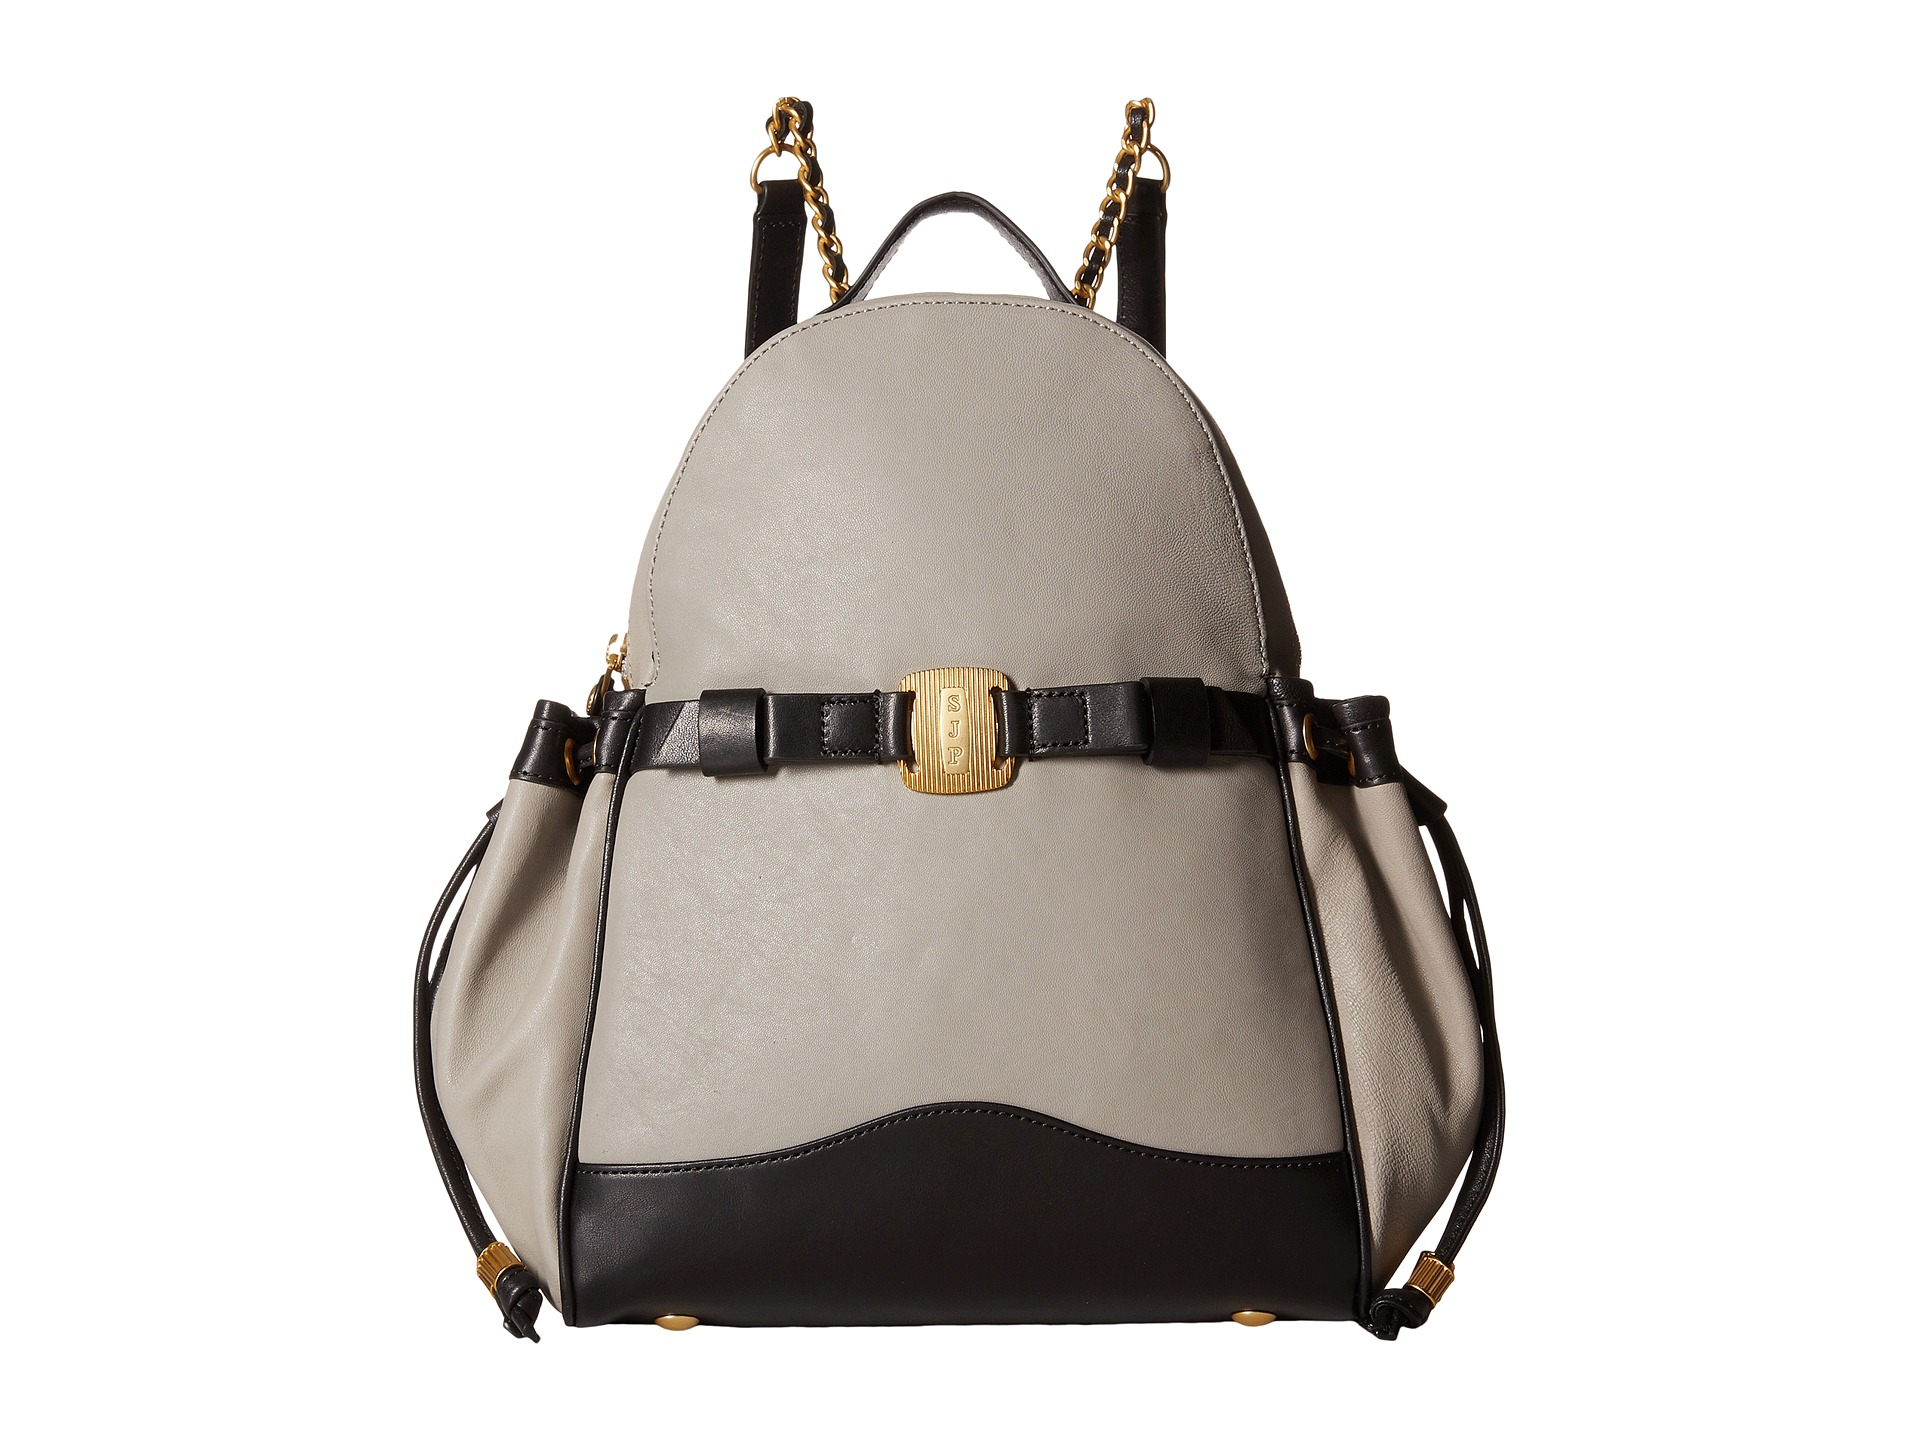 Sjp by sarah jessica parker Uni Colorblock Leather Backpack in Gray - Save 31% | Lyst